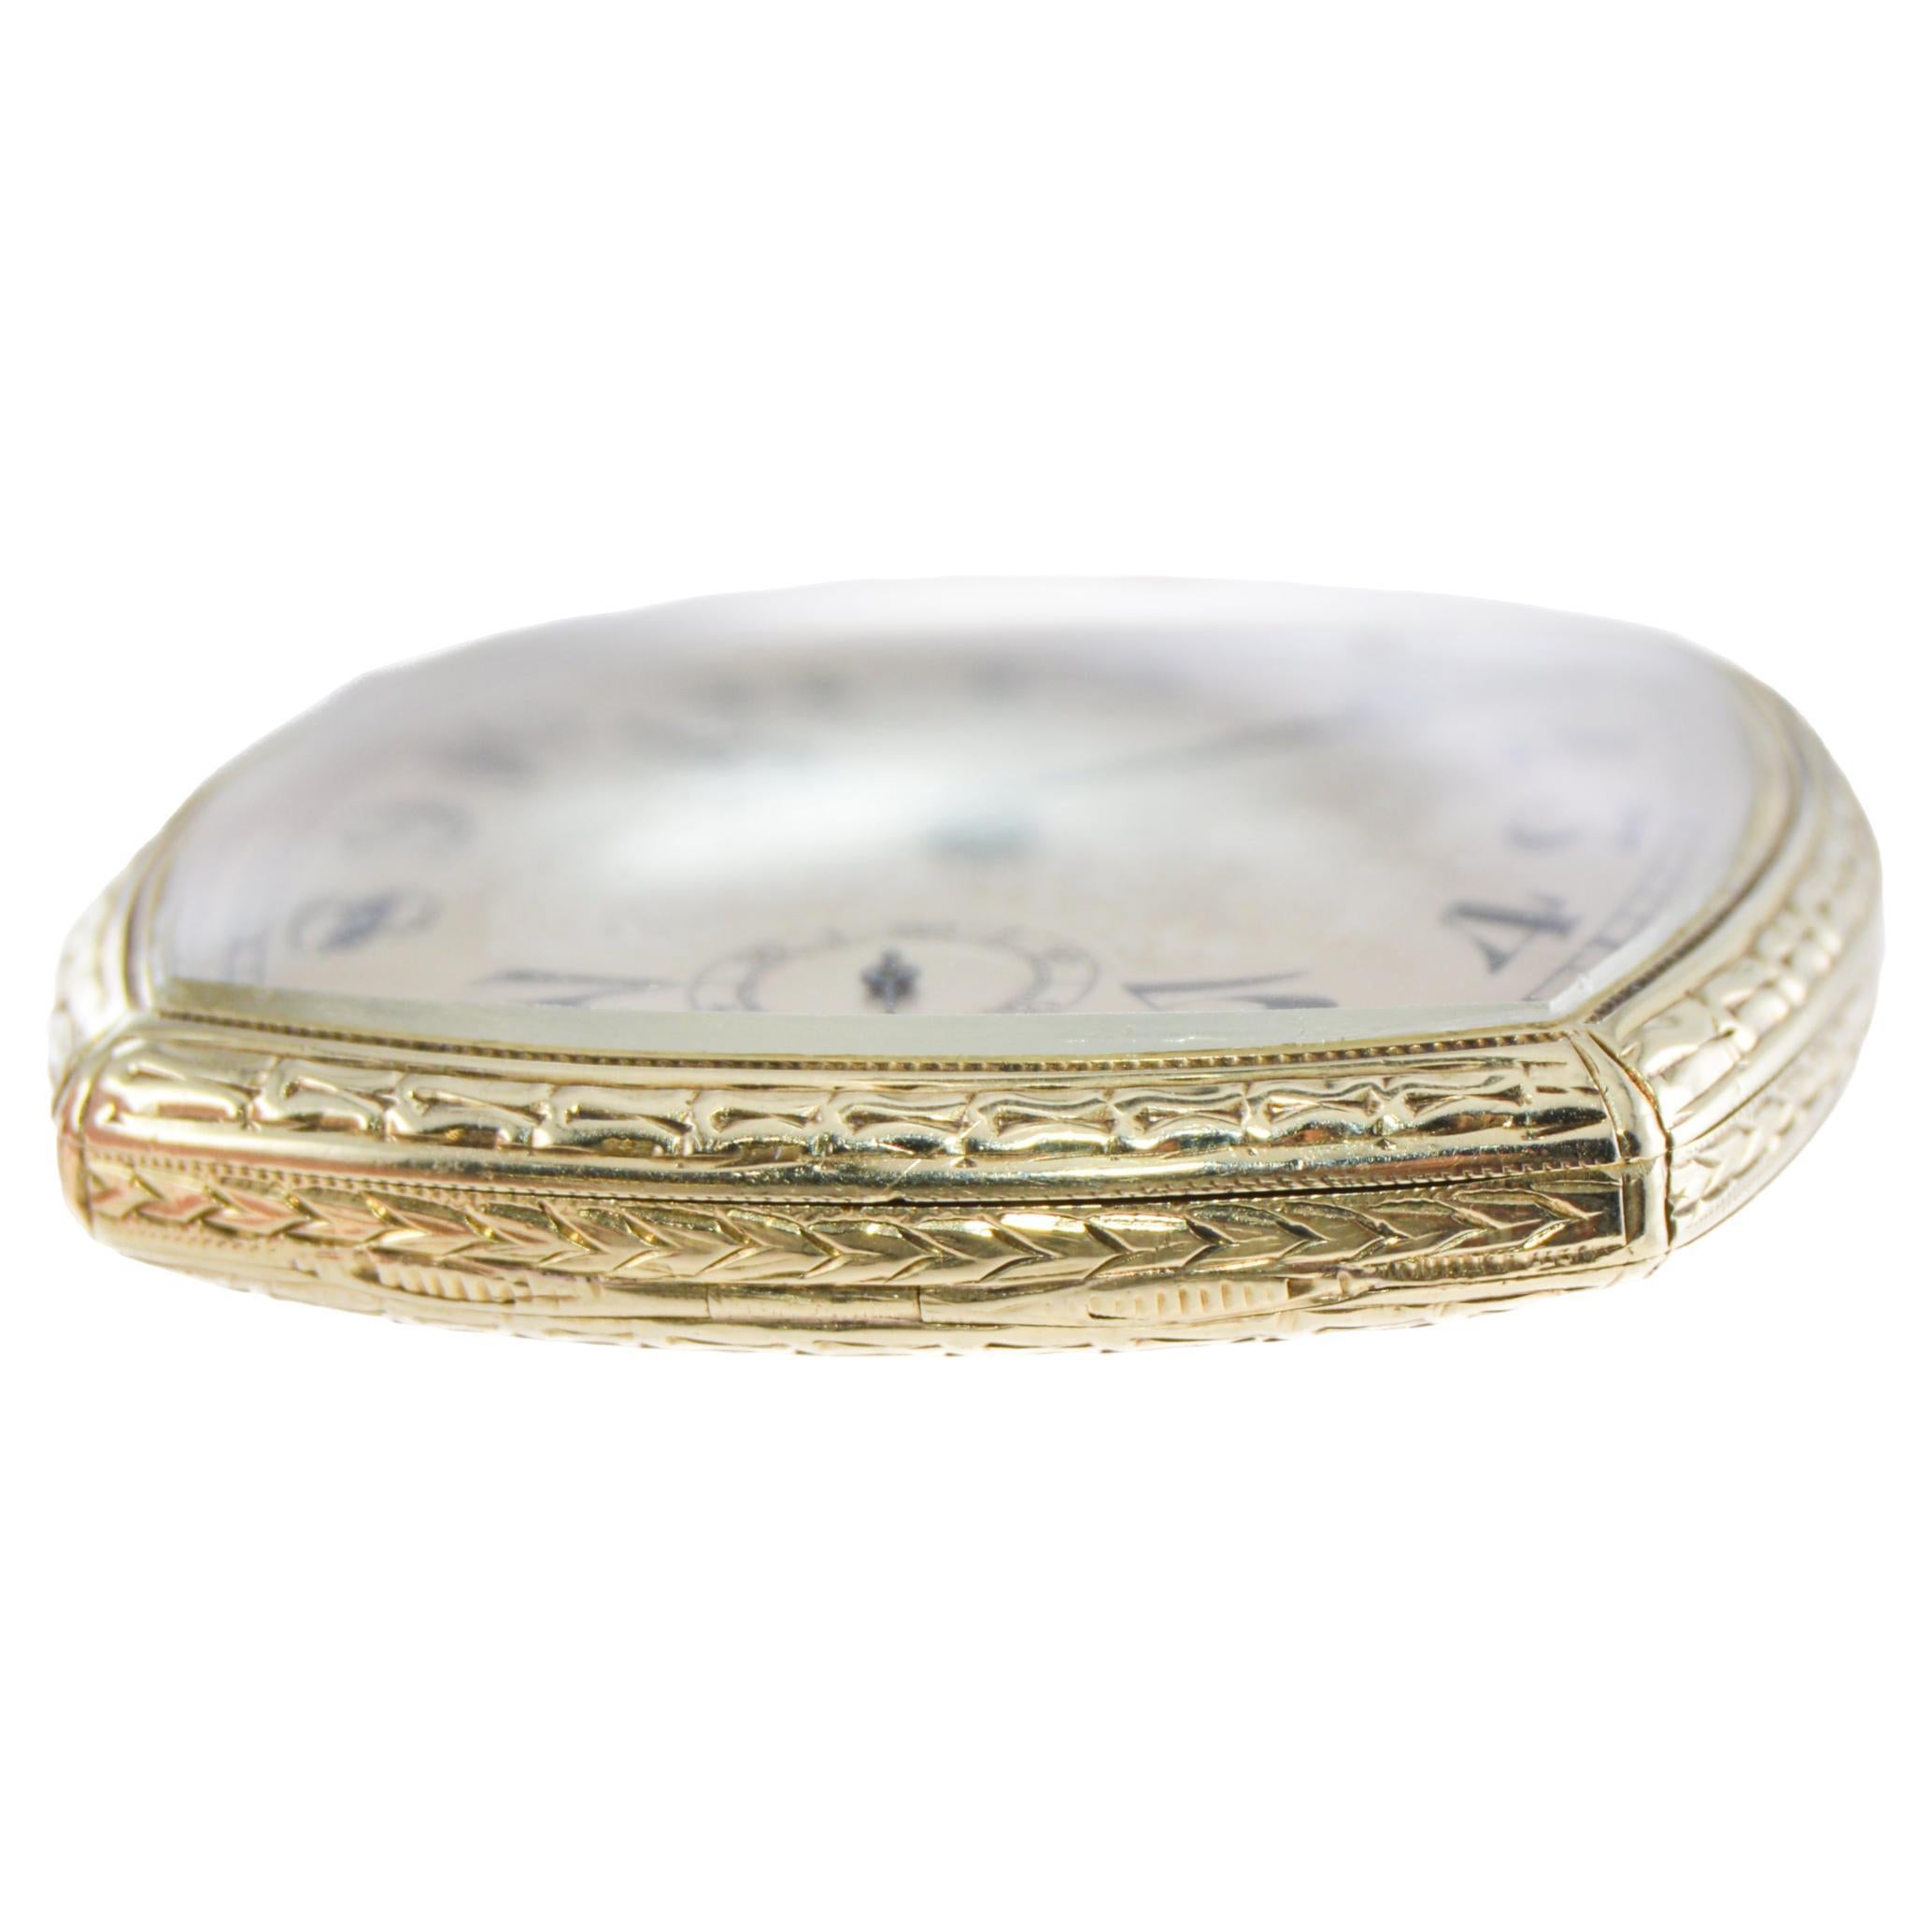 Black Starr & Frost 14 Karat Gold Art Deco Pocket Watch with Engraved Dial  For Sale 6